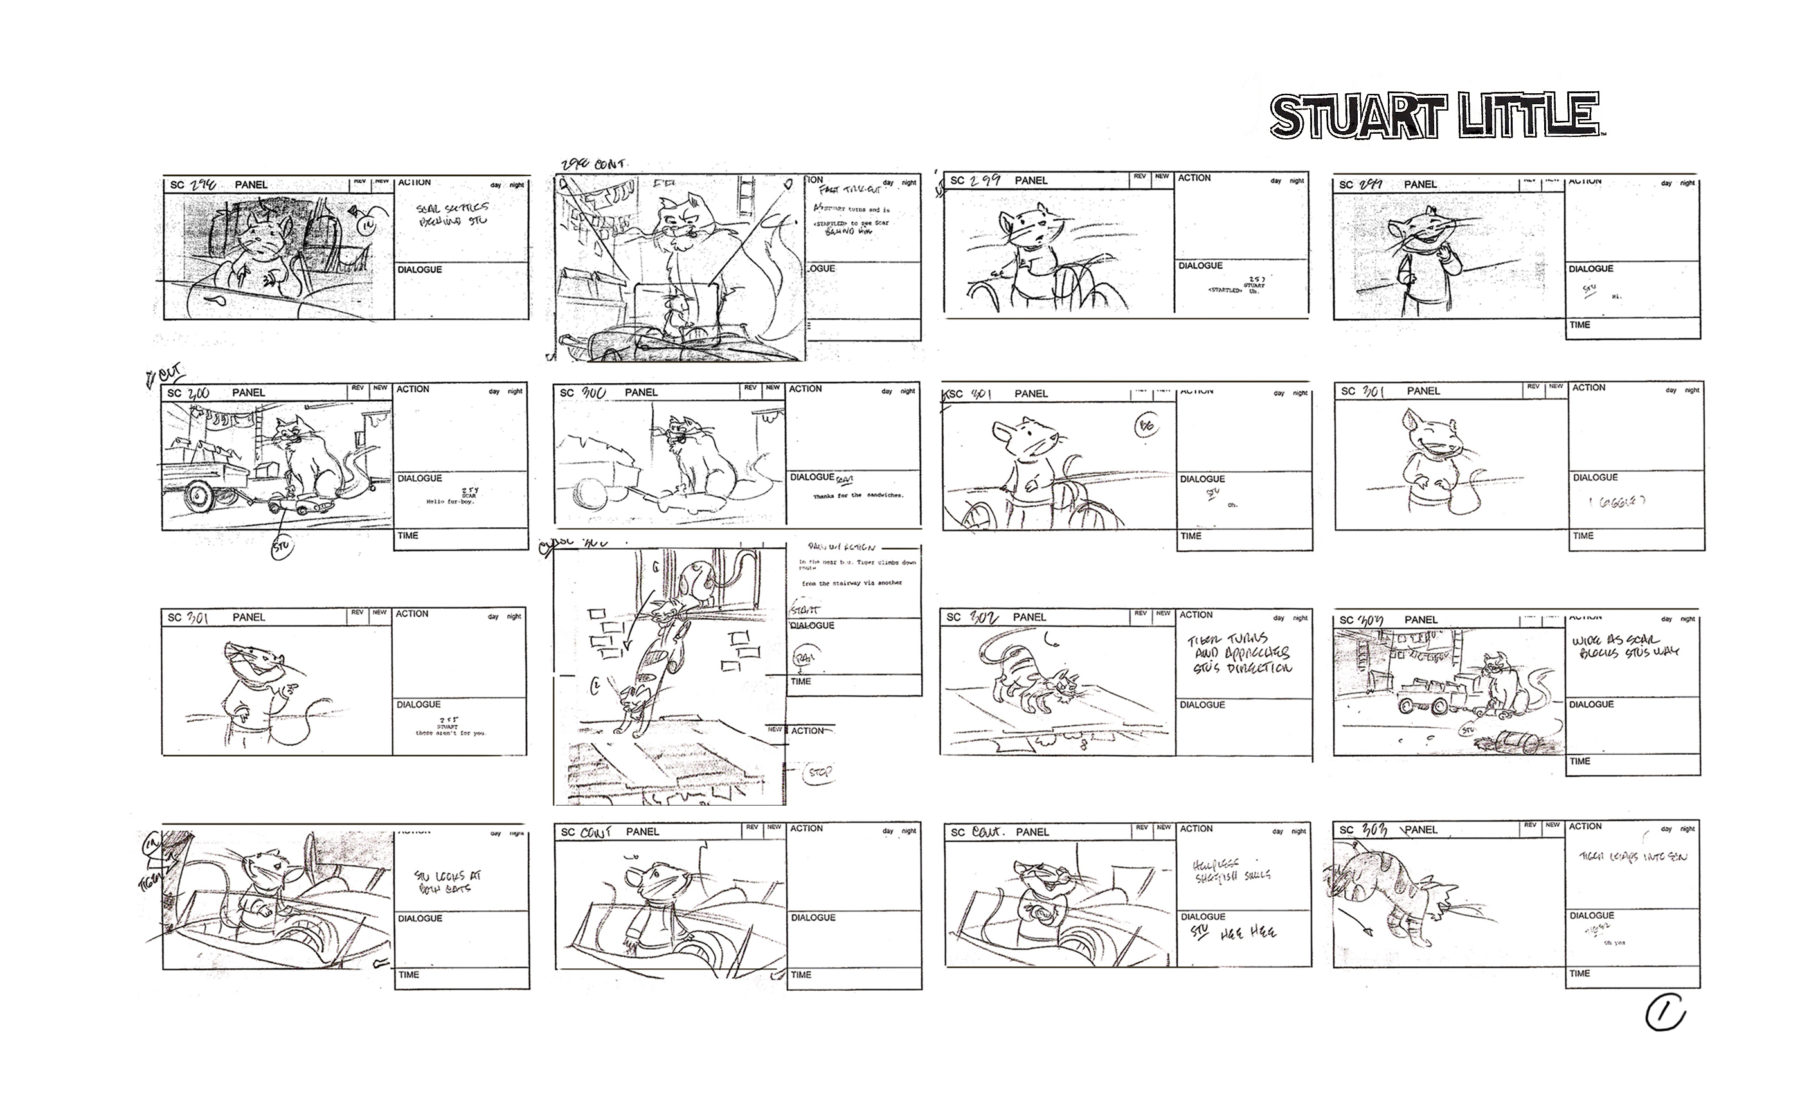 Storyboards by Bert Ring for the Stuart Little Animated Series, Universal Animation Studios